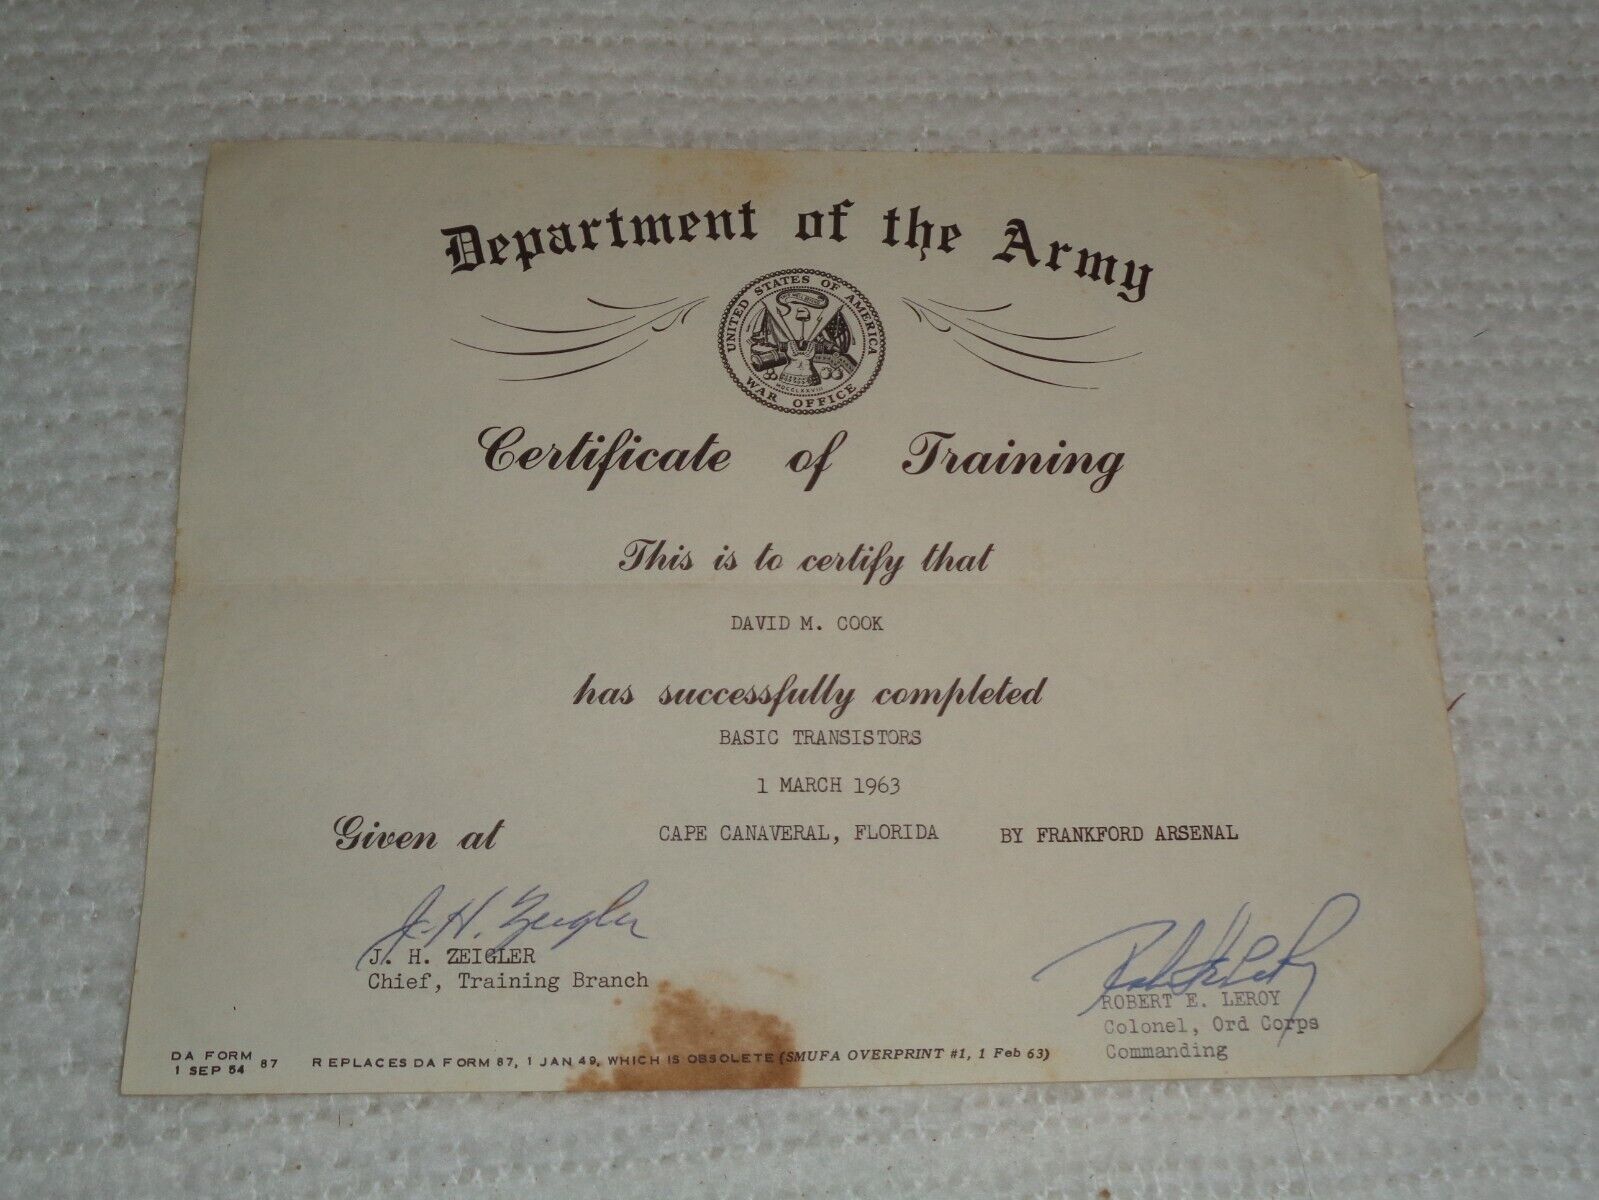 1963 U.S. Army Frankford Arsenal Cape Canaveral Florida Certificate of Training